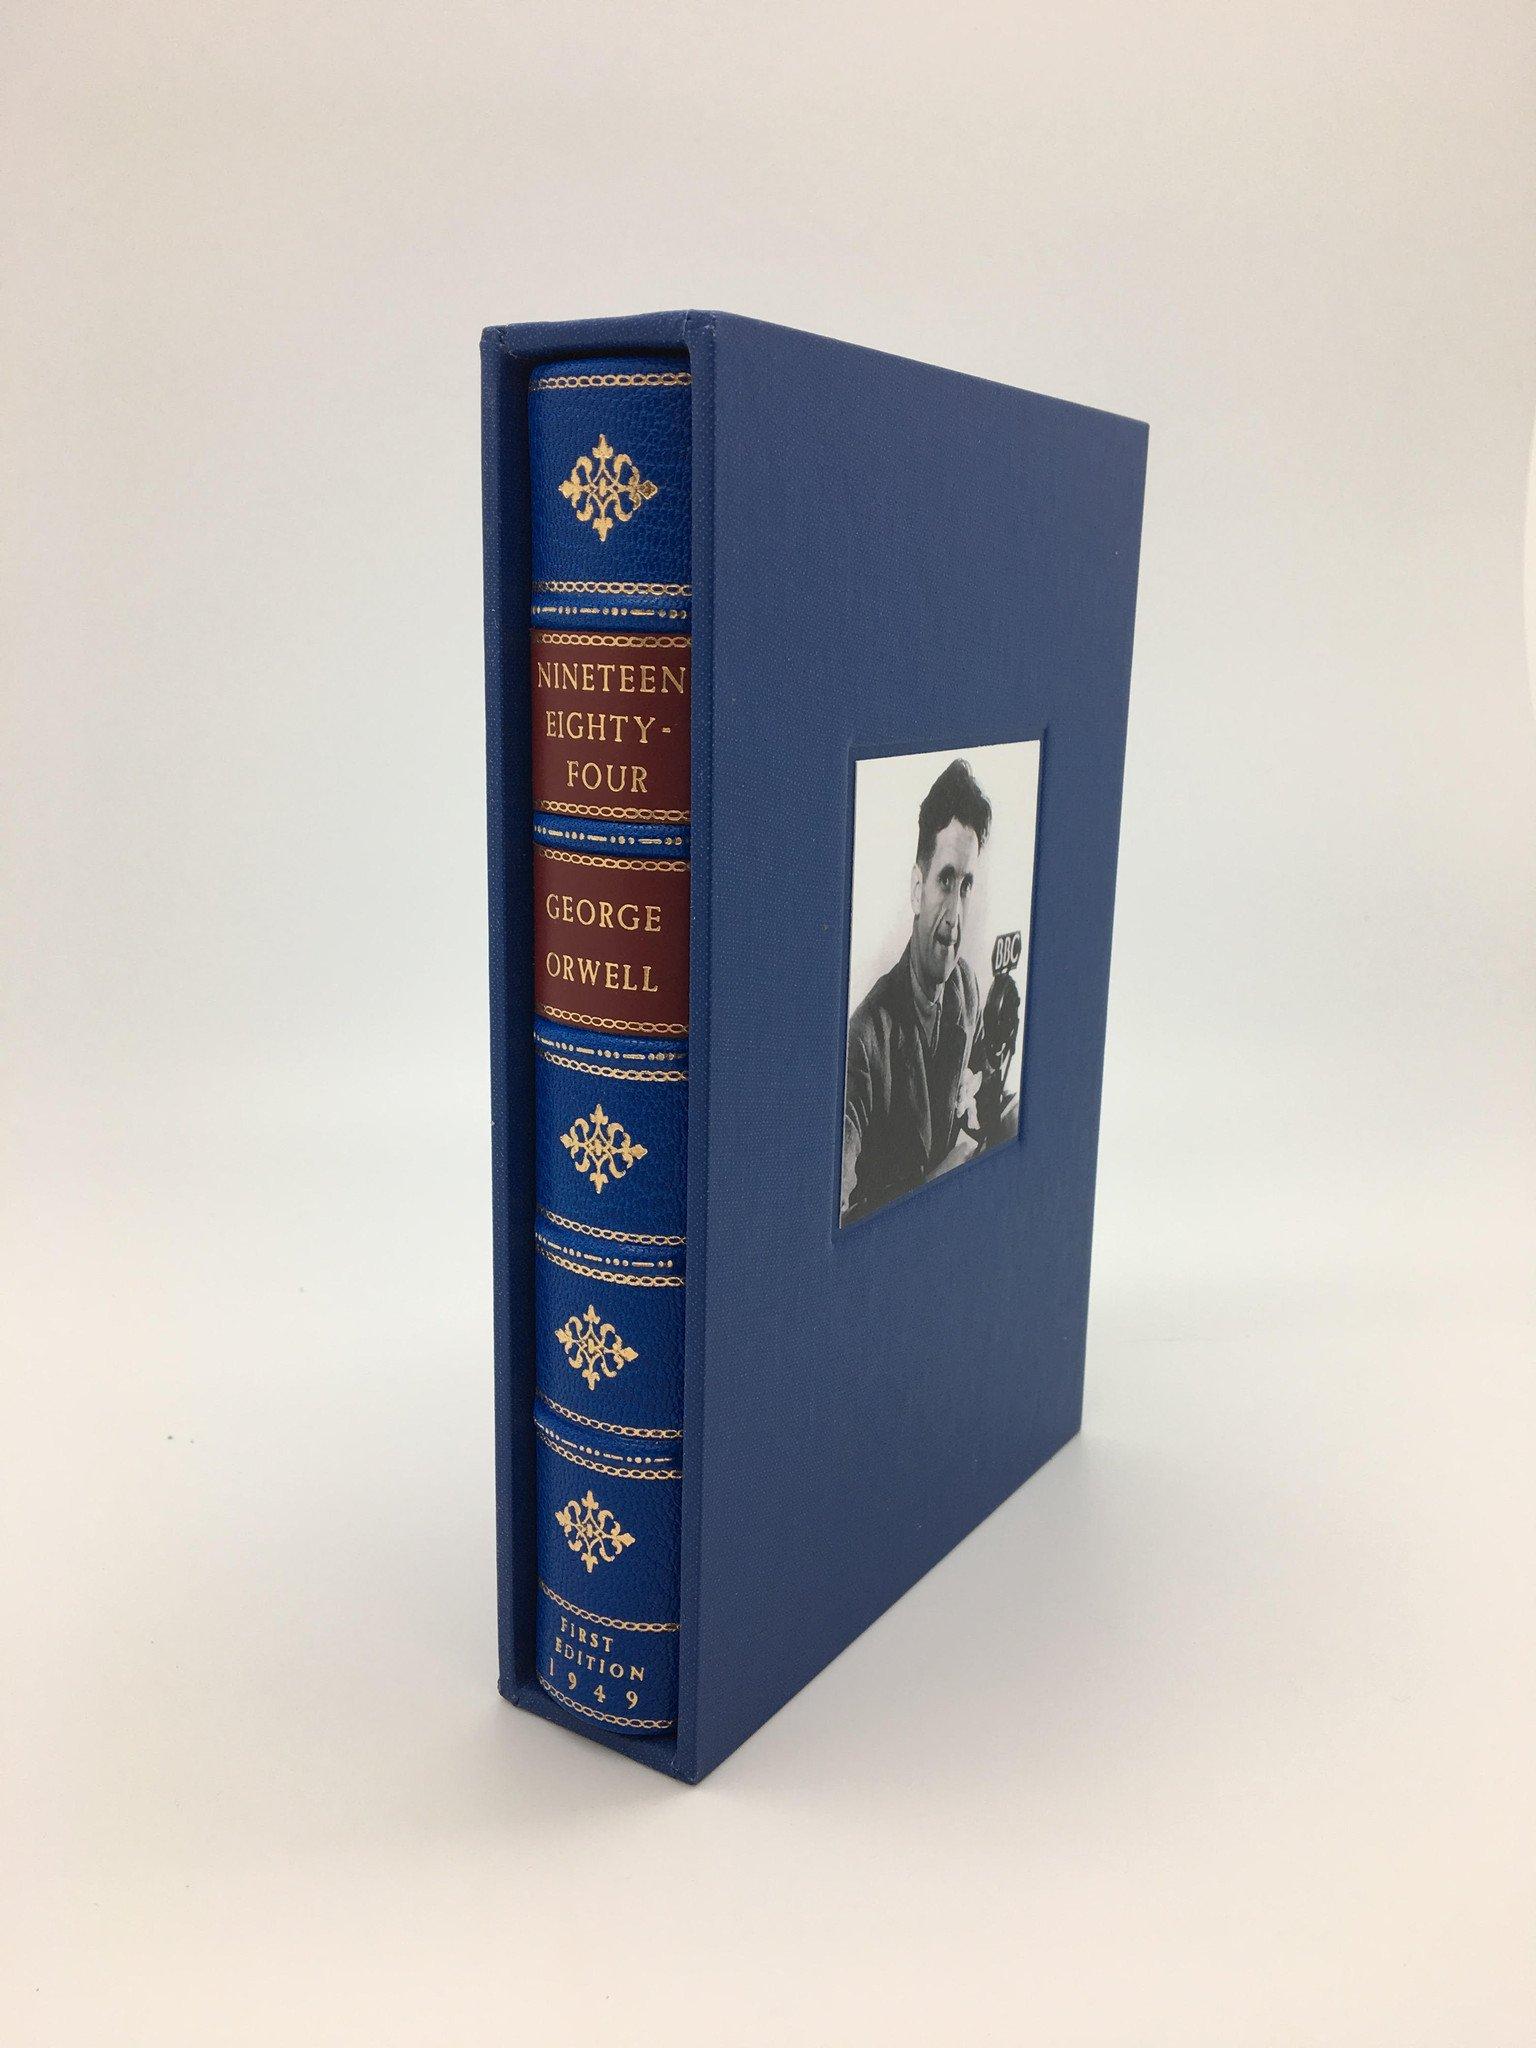 Orwell, George. Nineteen Eighty-four. London: Secker and Warburg, 1949. First edition - rebound in beautiful quarter leather and housed in a custom matching slipcase.

This is a first edition, first printing of George Orwell's famous dystopian